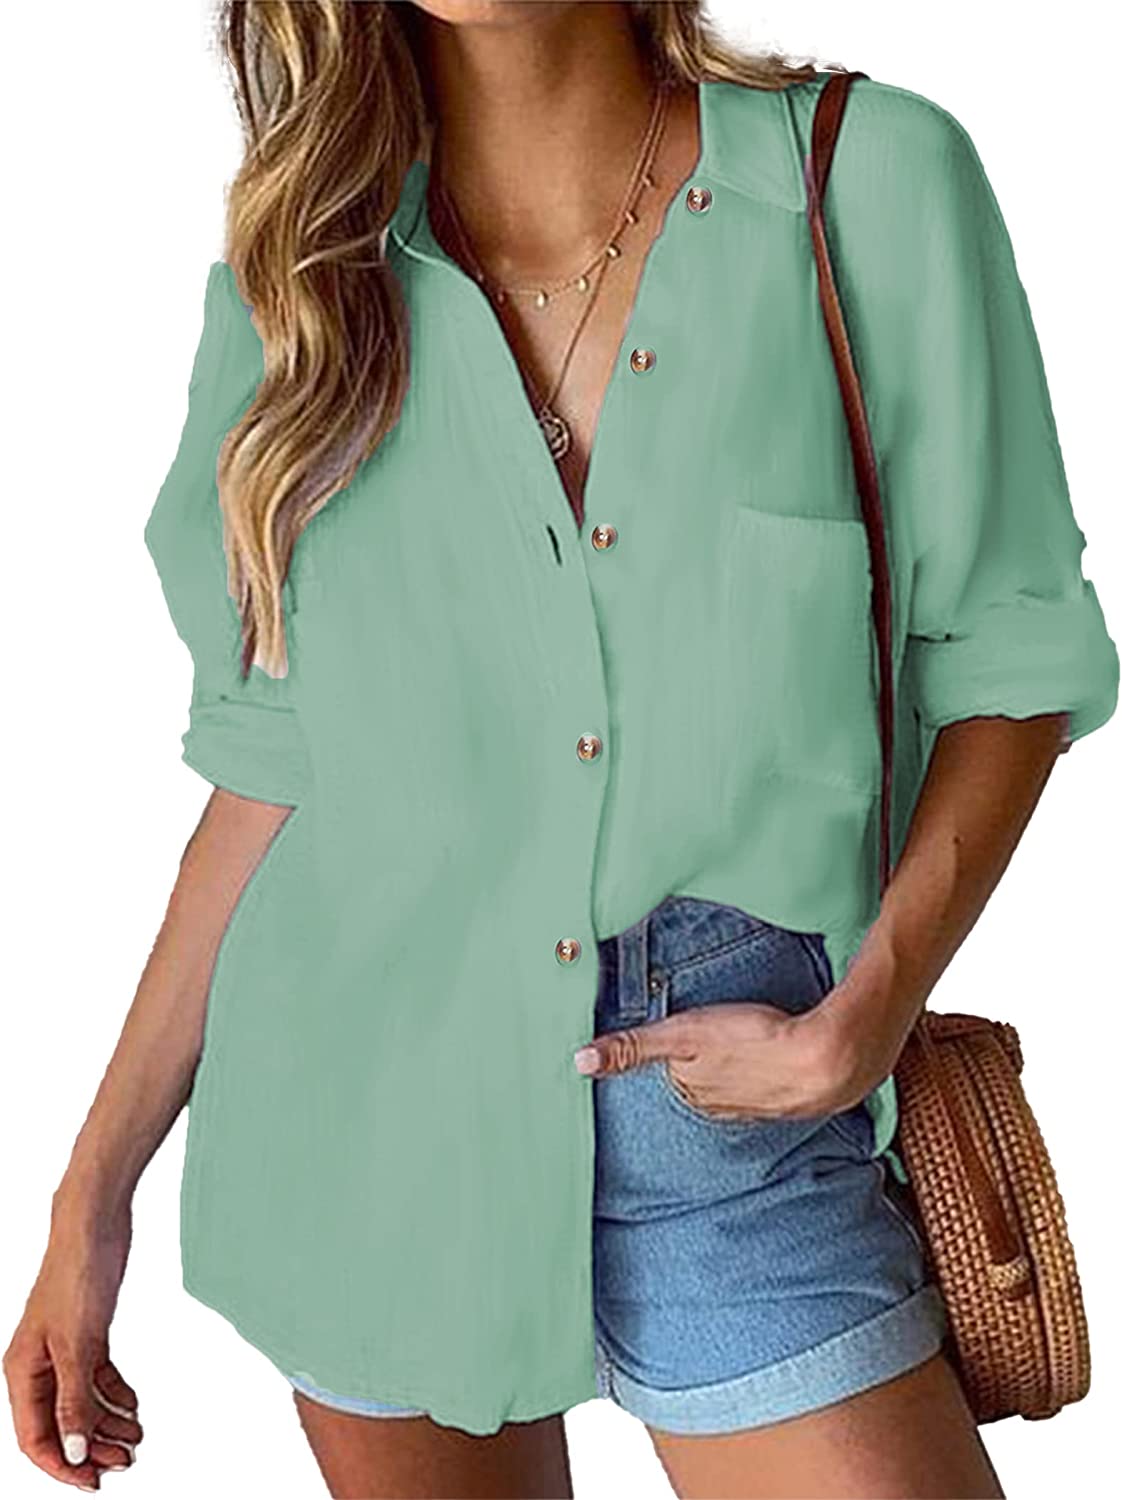 Hotouch Women's Short Sleeve Button Down V-Neck Casual Loose Shirt